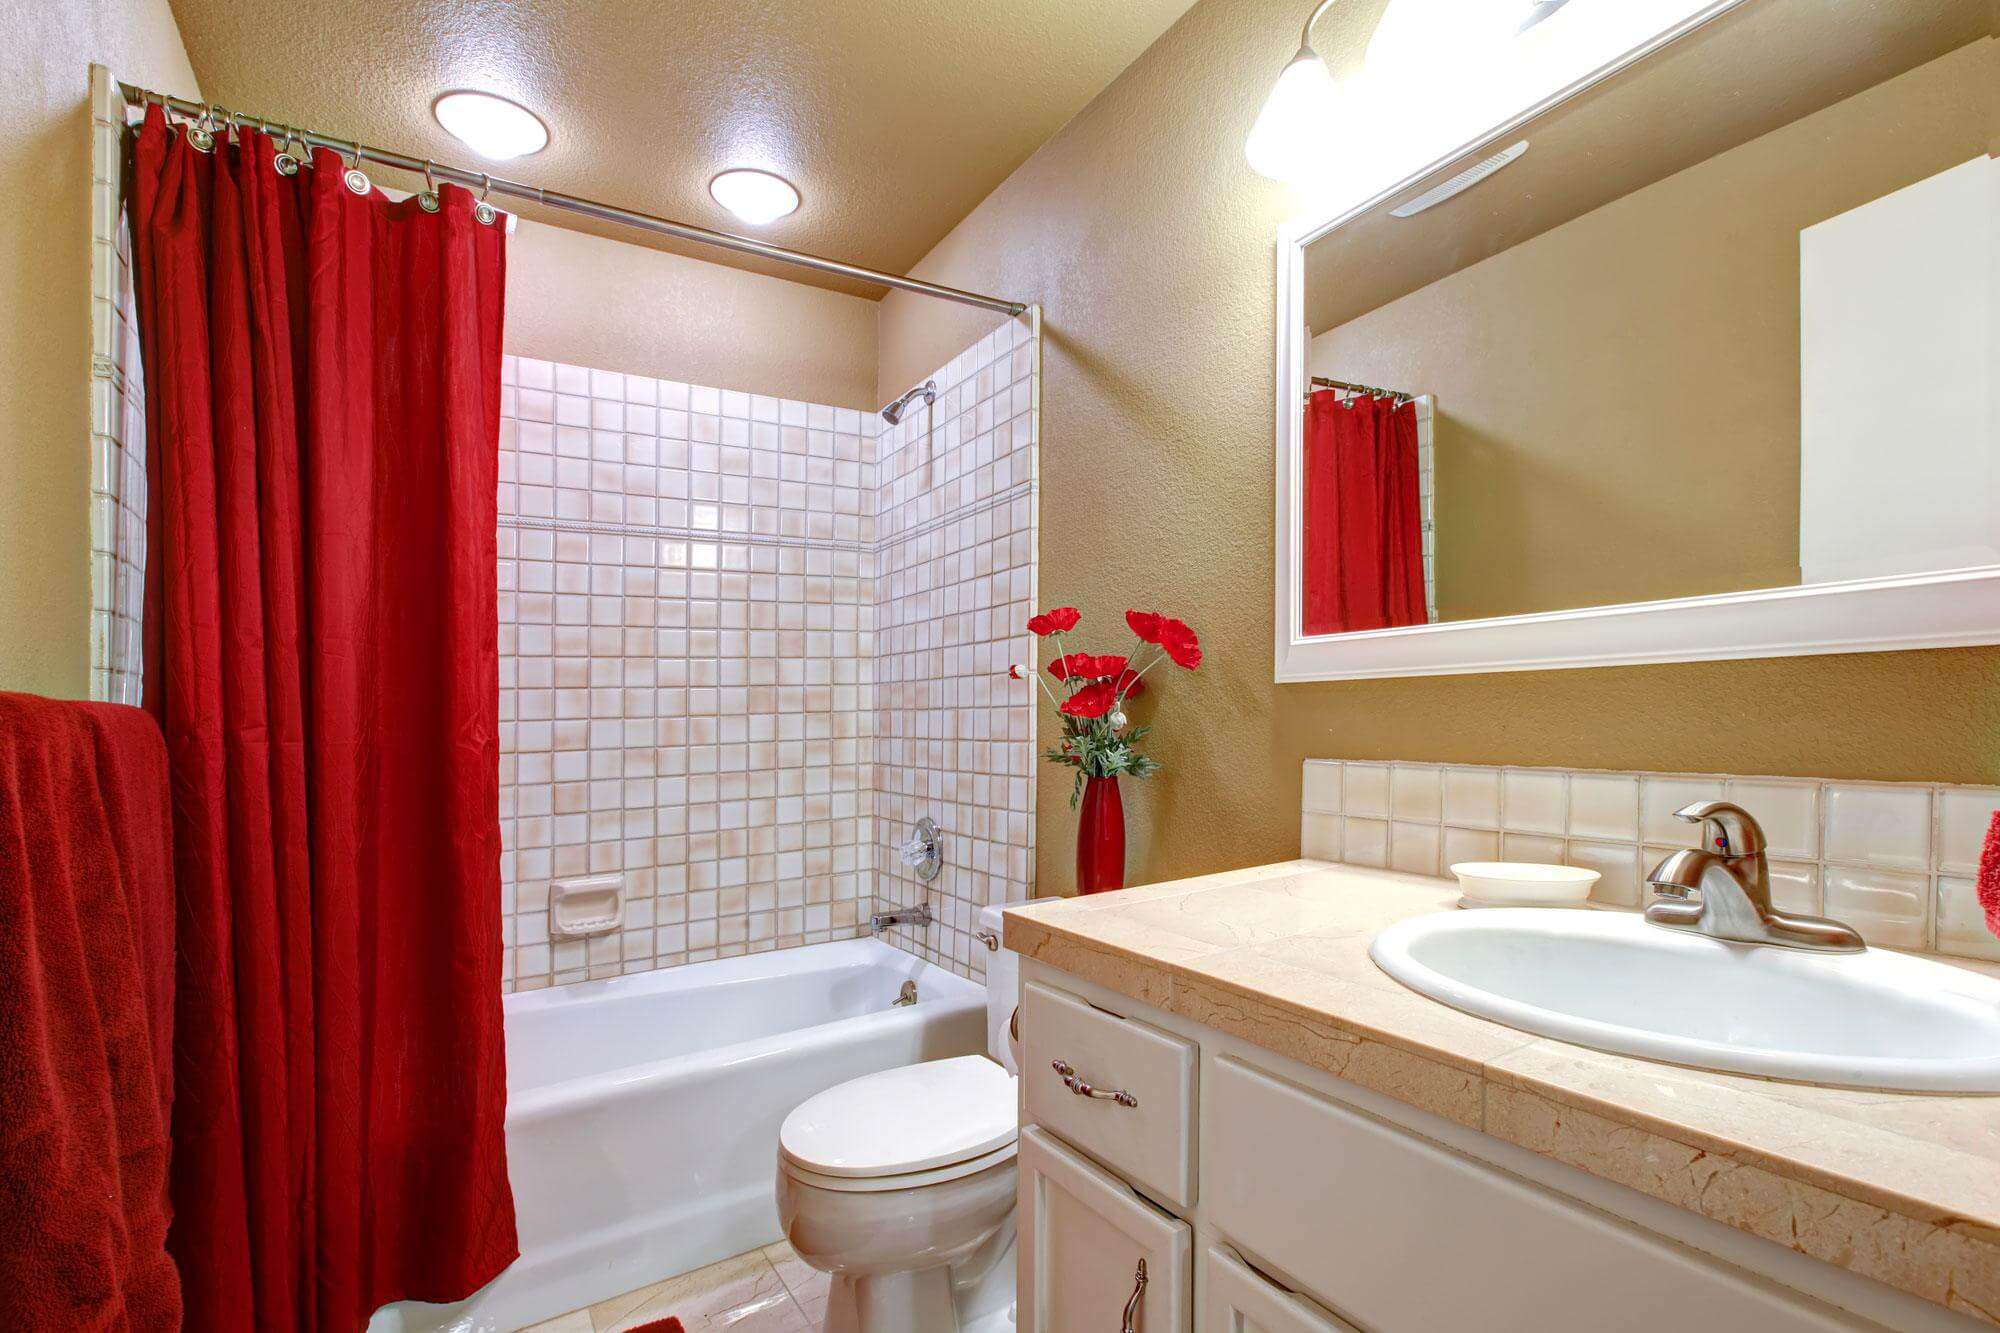 Clean and sparkling bathroom sink, toilet and shower tub